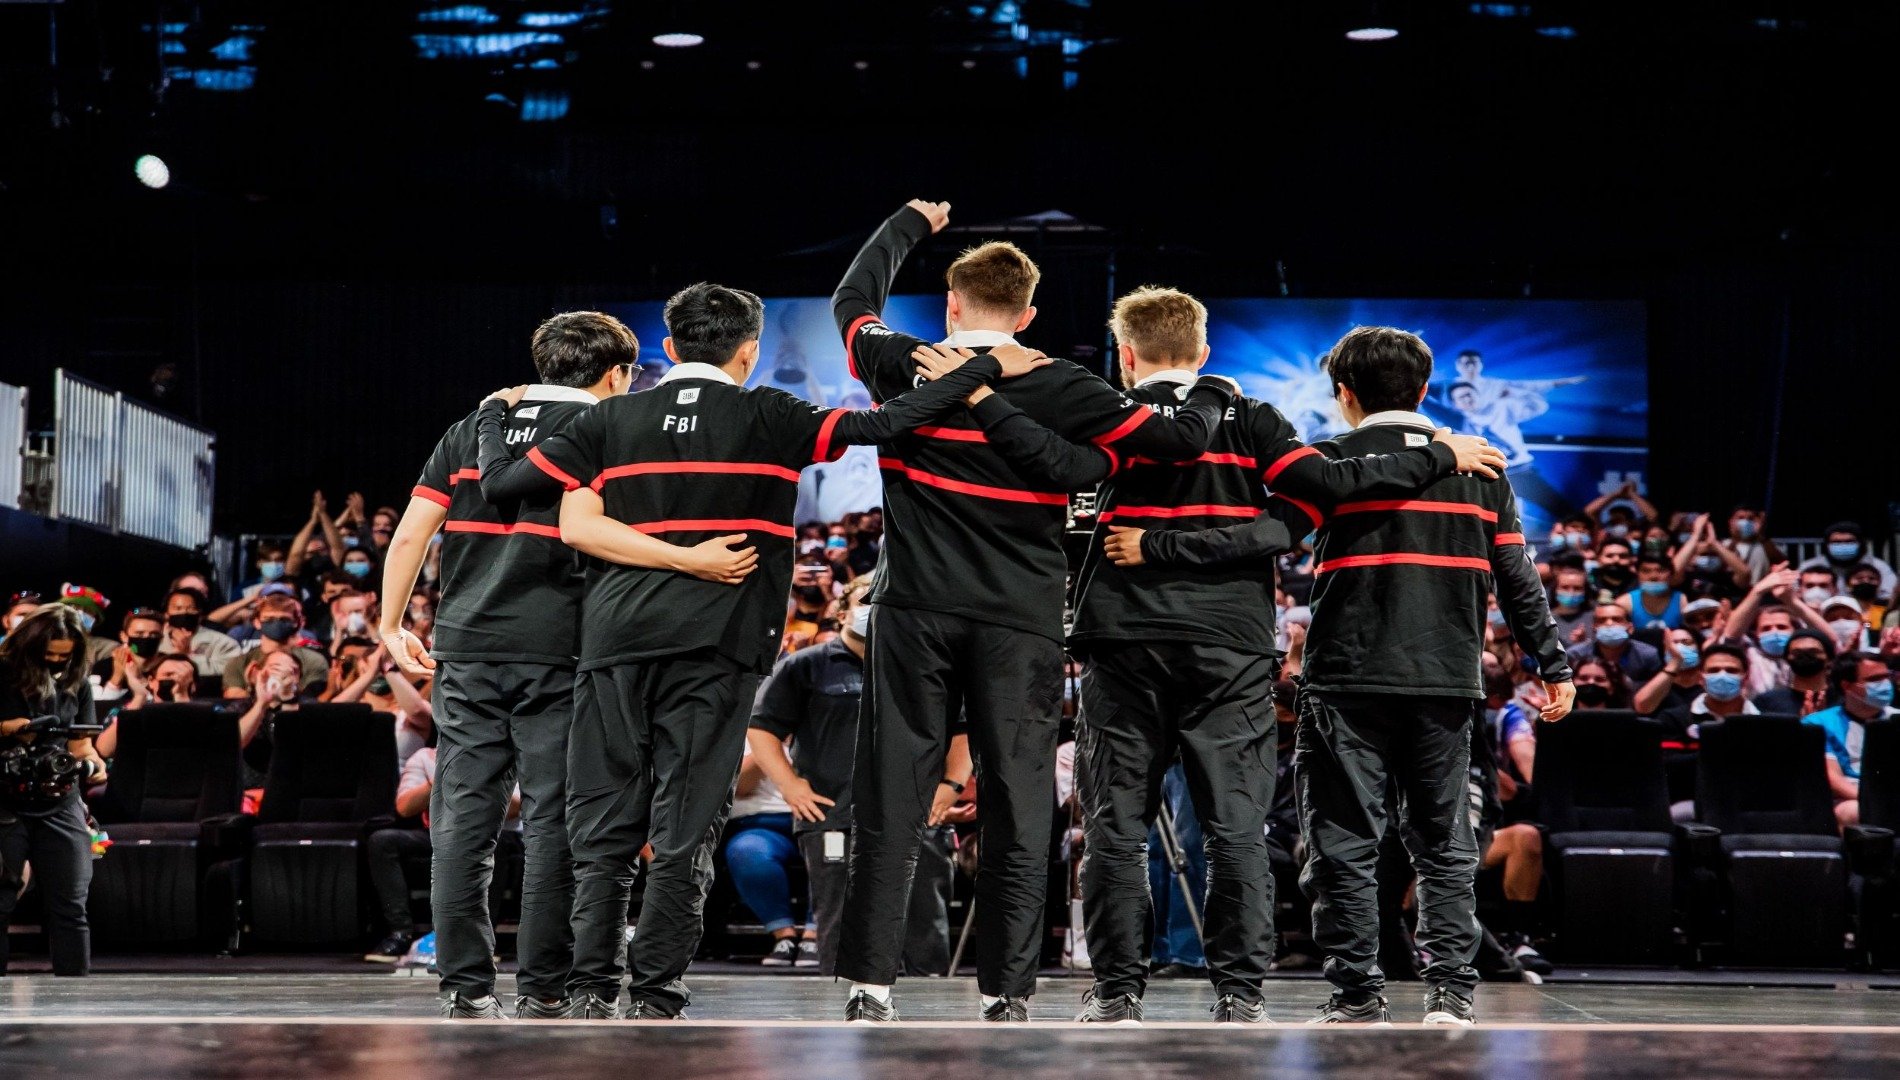 100 Thieves LCS roster waving on-stage